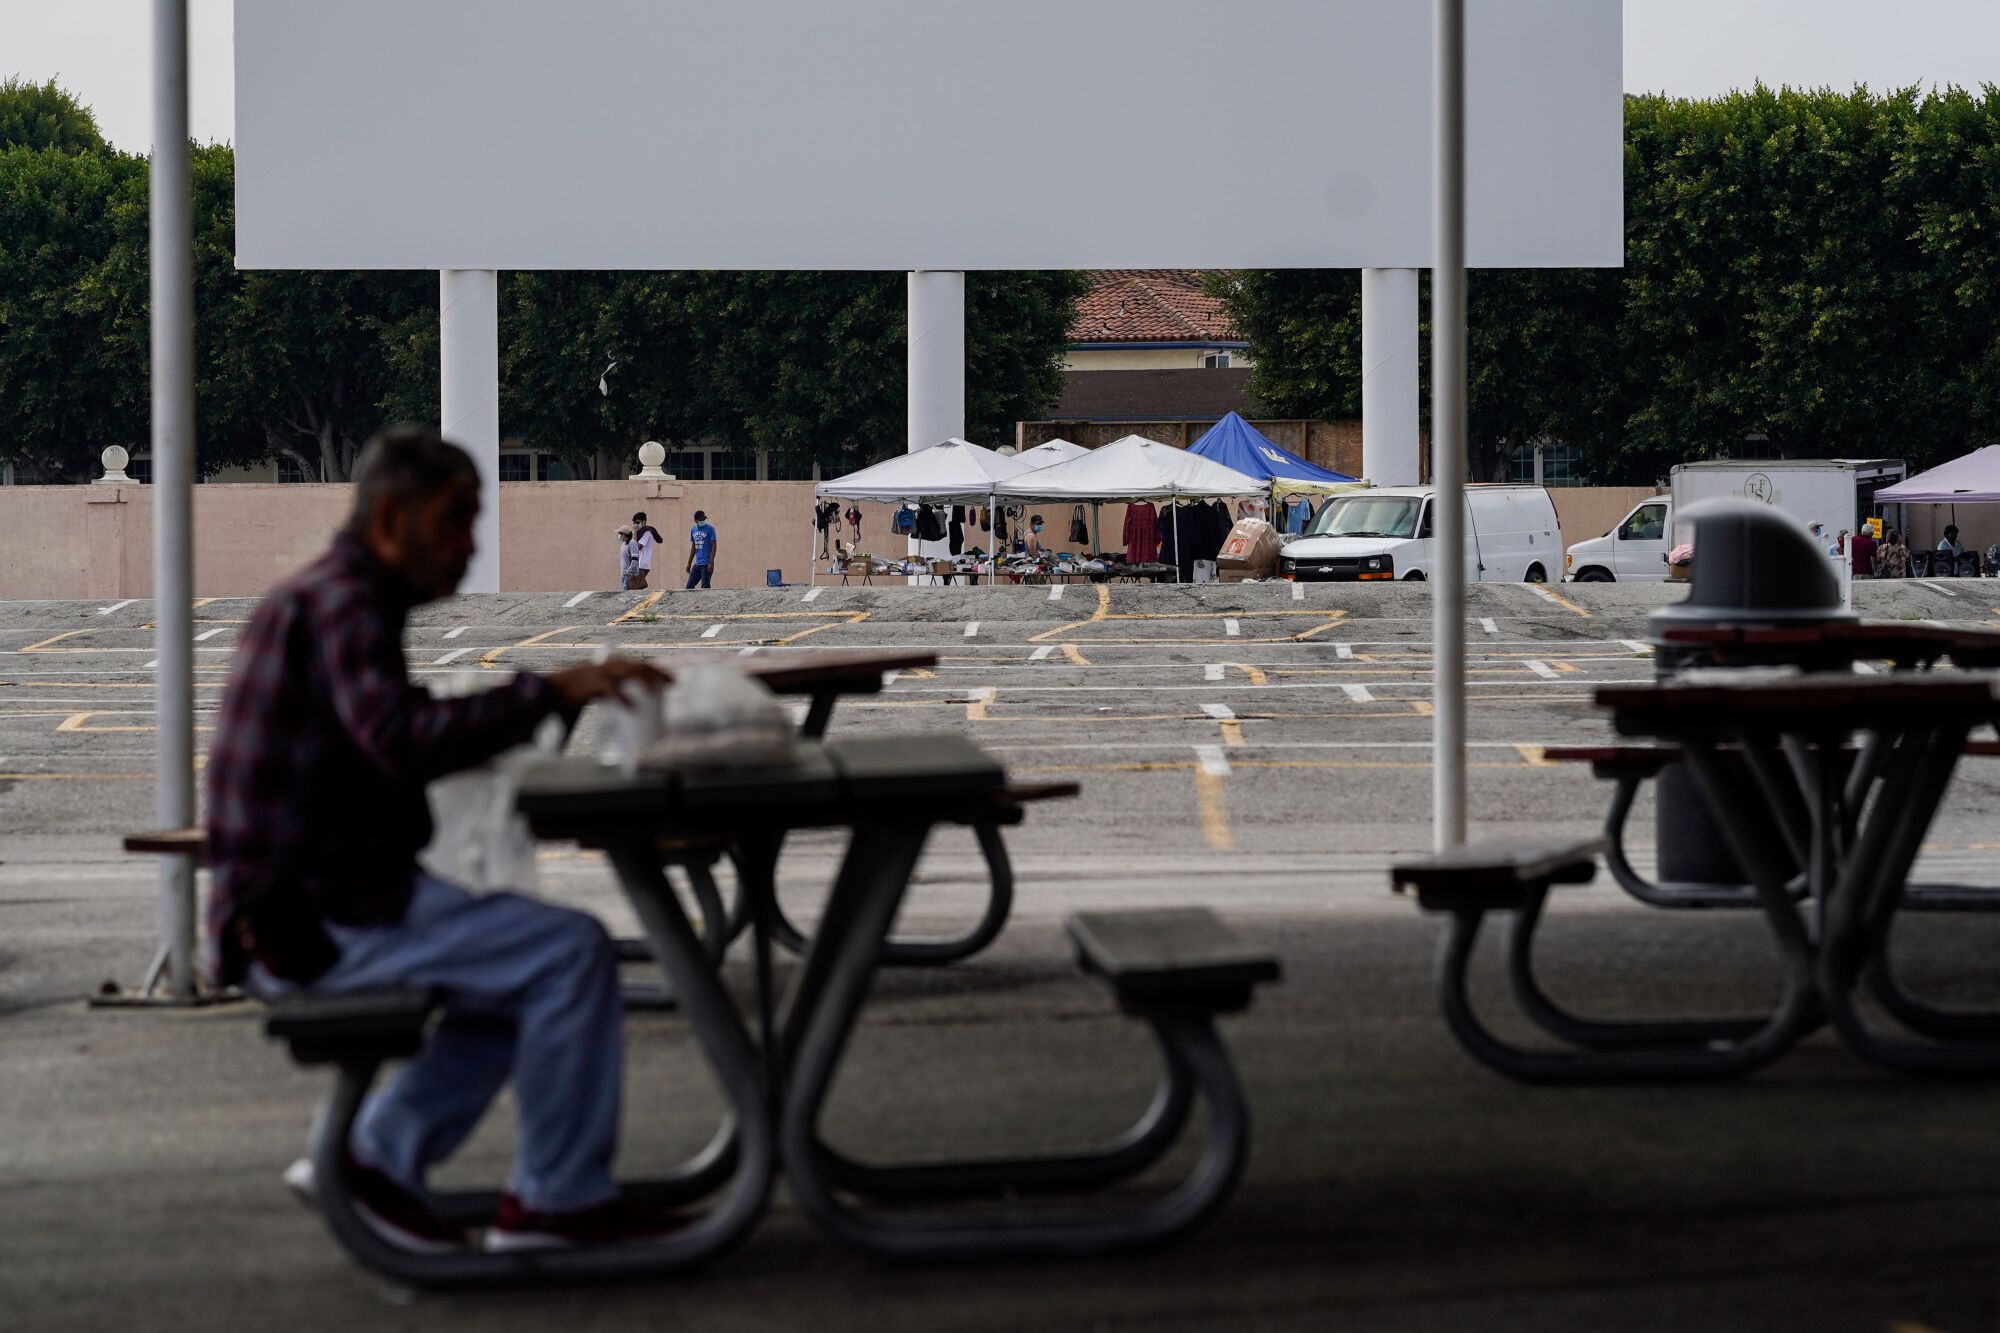 A lone vendor is seen near the drive-in movie screen at the Paramount Swap Meet, normally packed with vendors and shoppers.